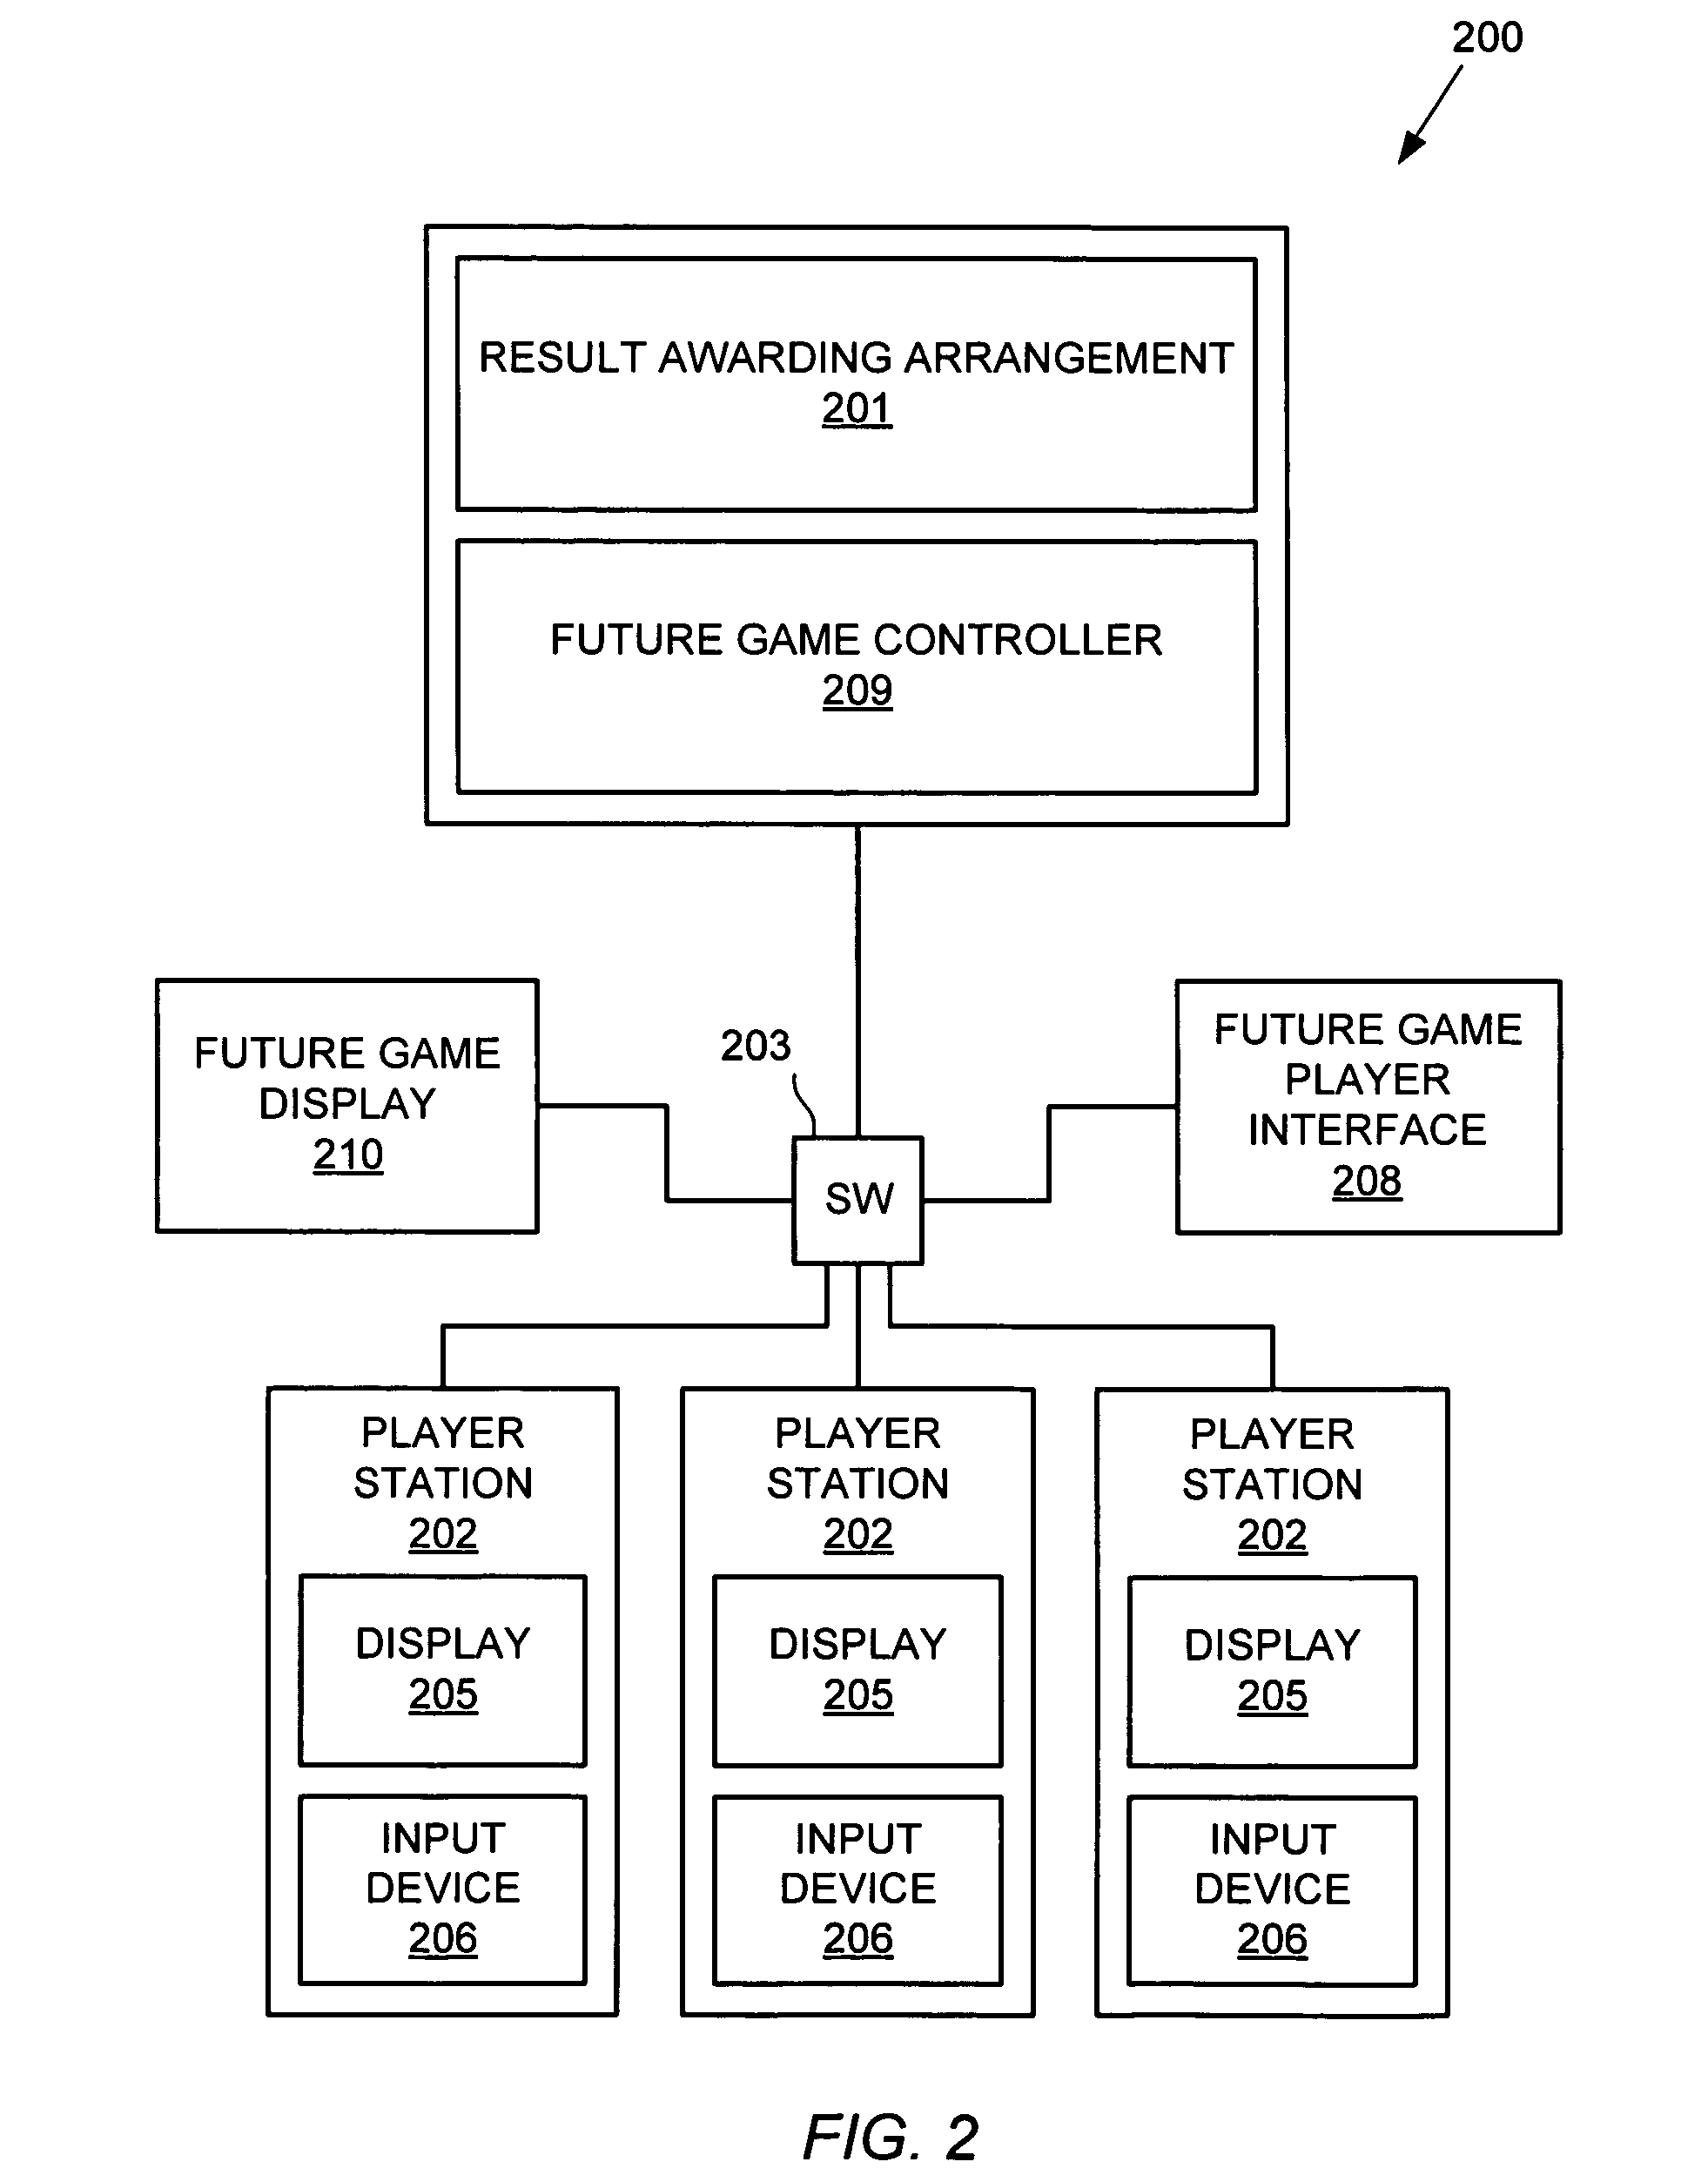 Arrangements for awarding future prizes in an electronic game system